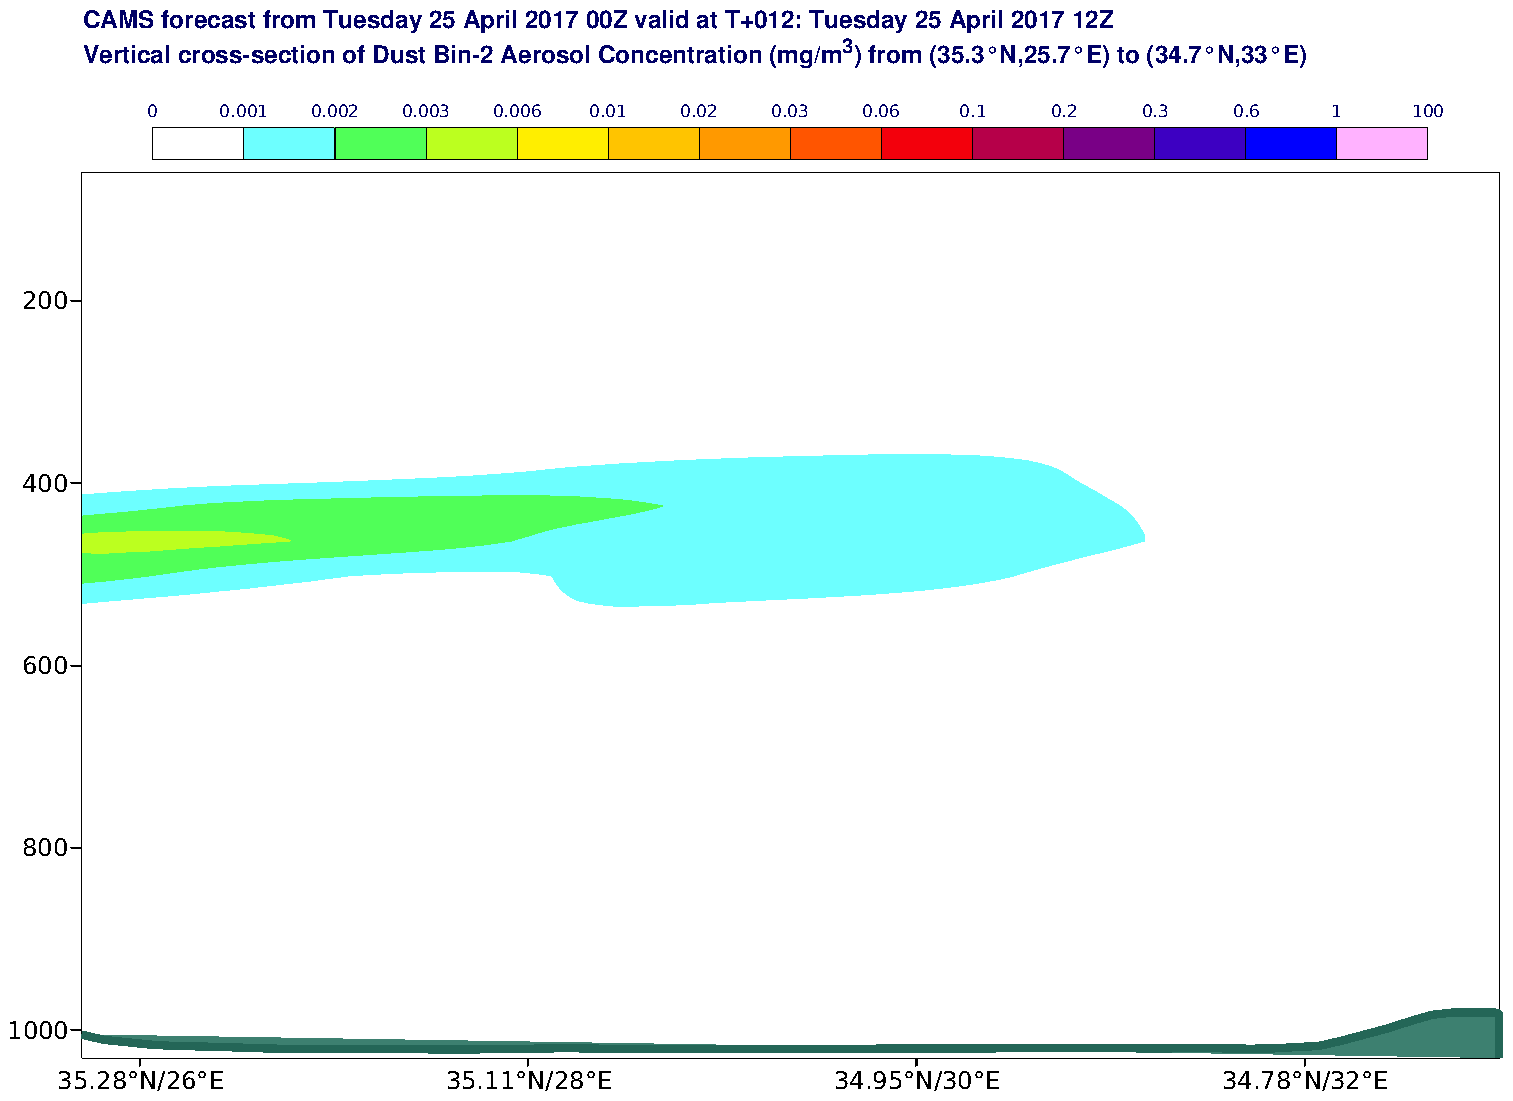 Vertical cross-section of Dust Bin-2 Aerosol Concentration (mg/m3) valid at T12 - 2017-04-25 12:00